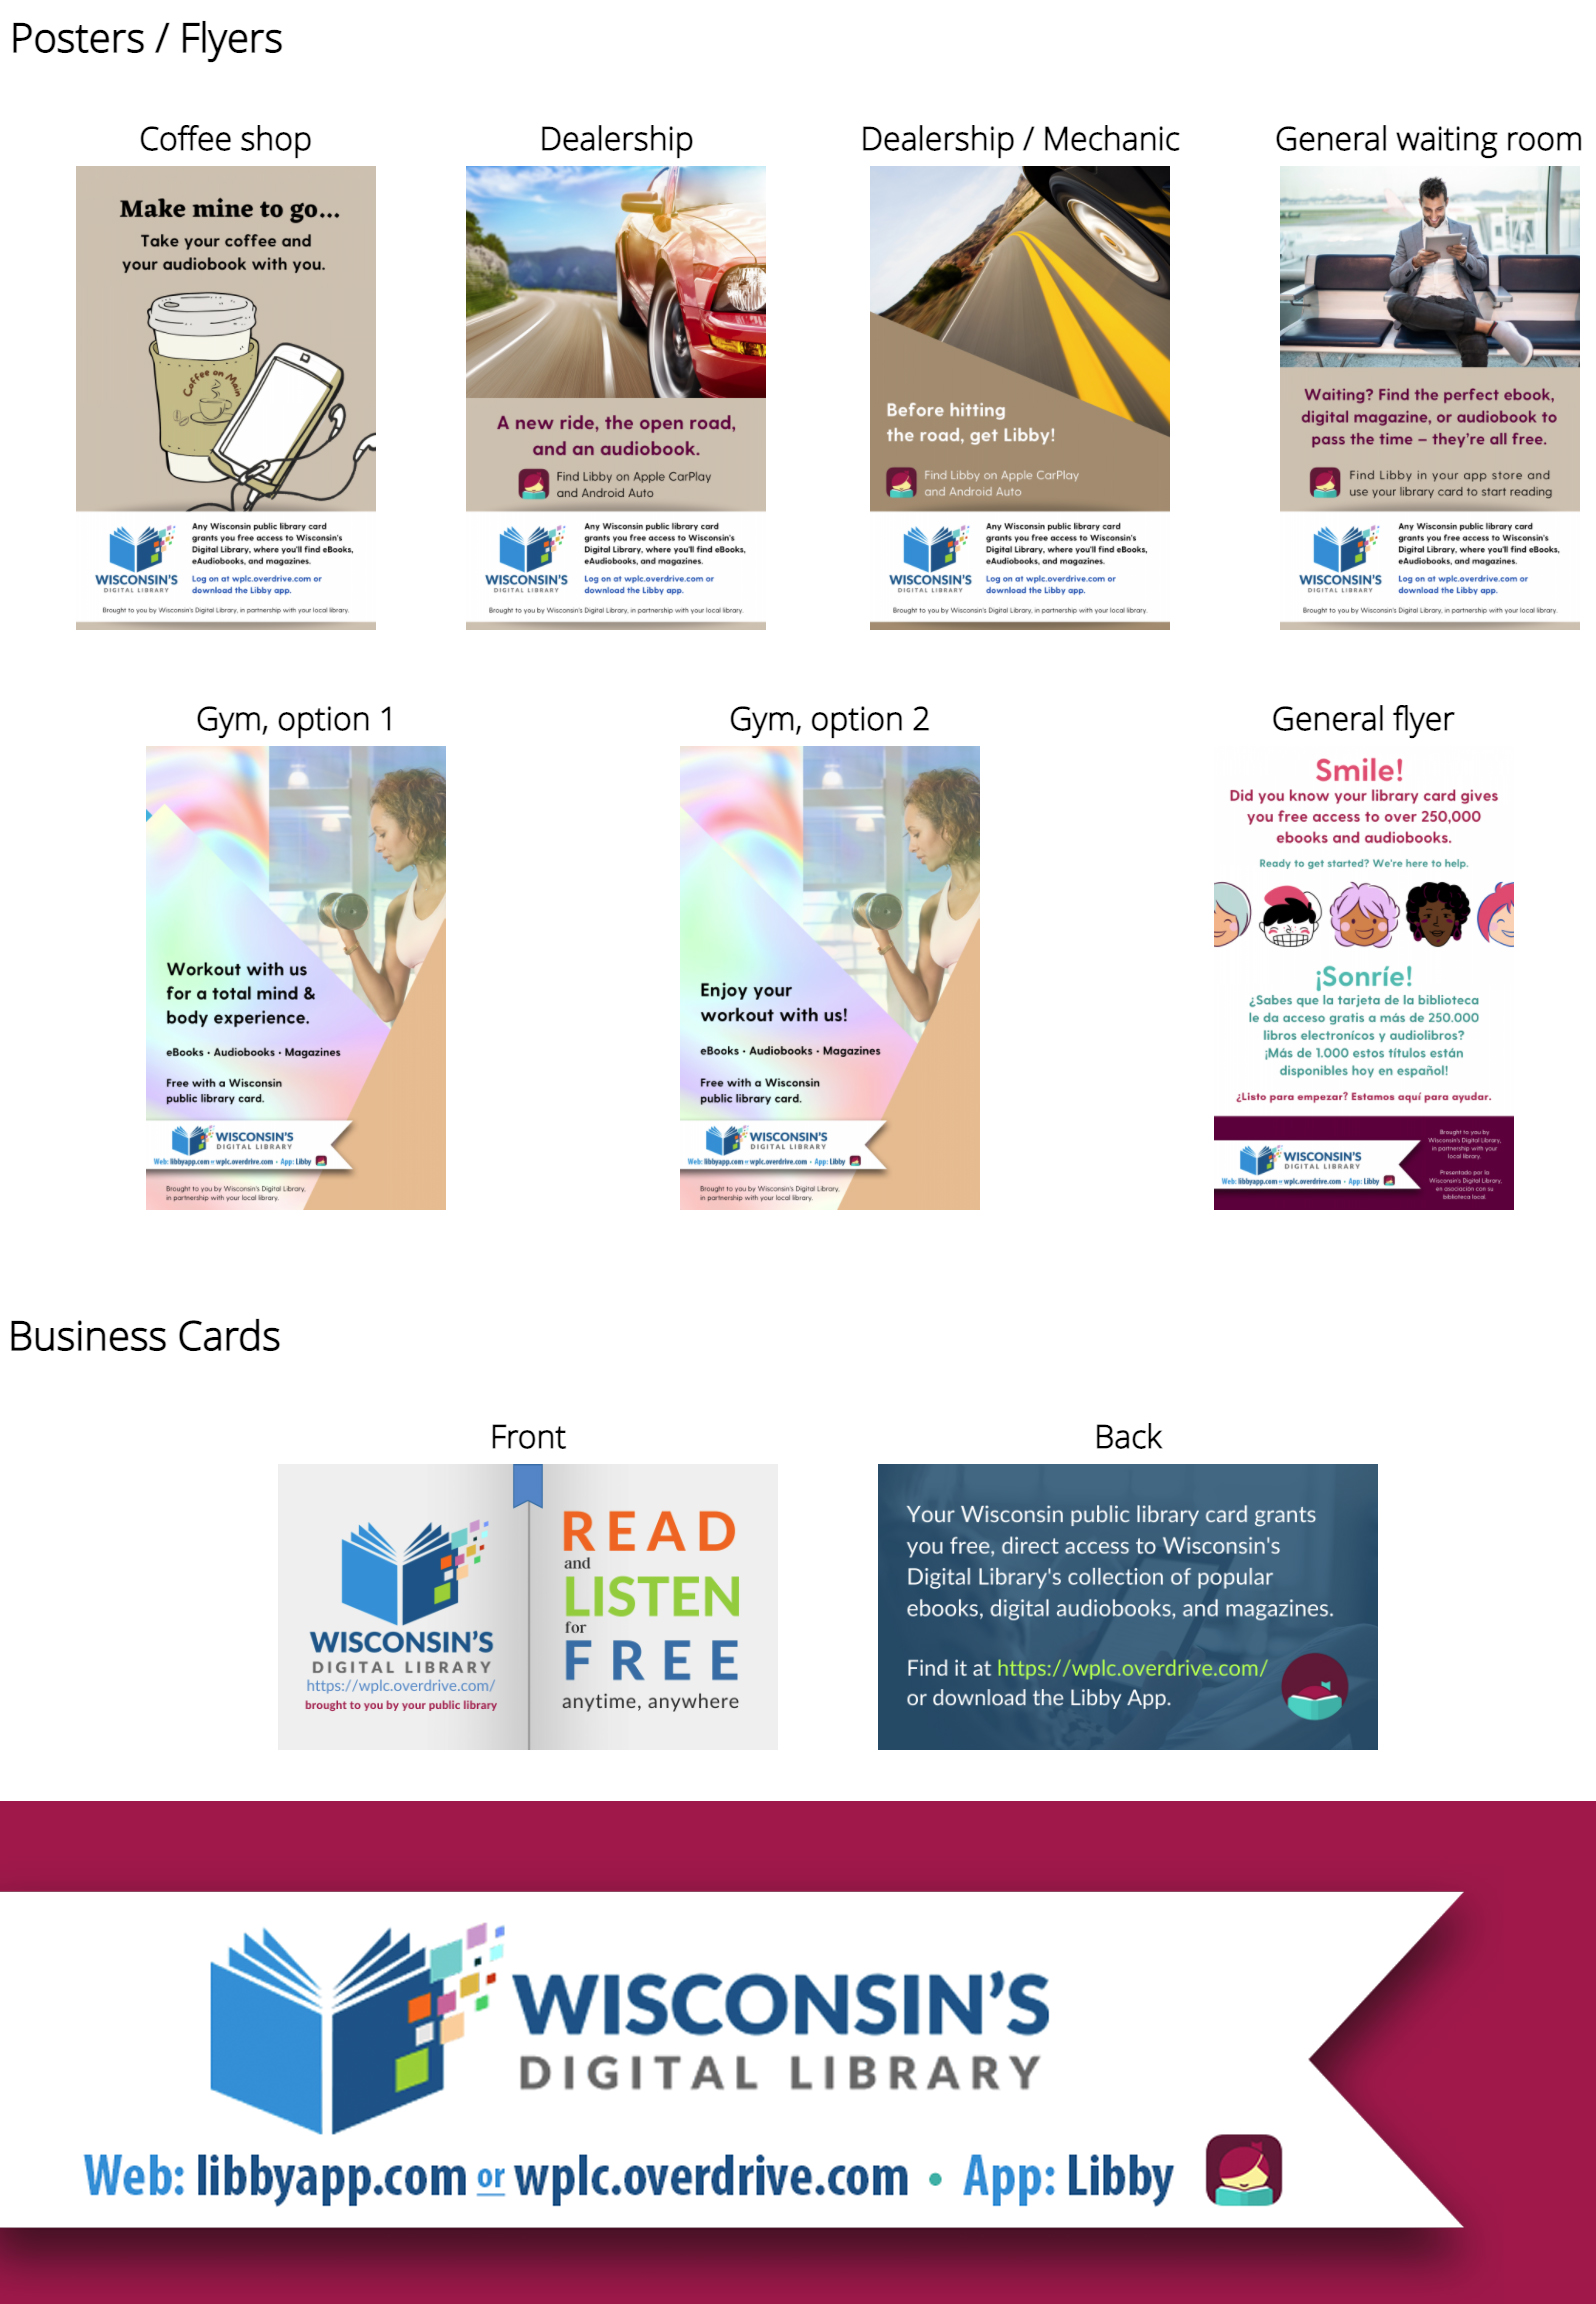 Preview of the posters and business cards available from WPLC